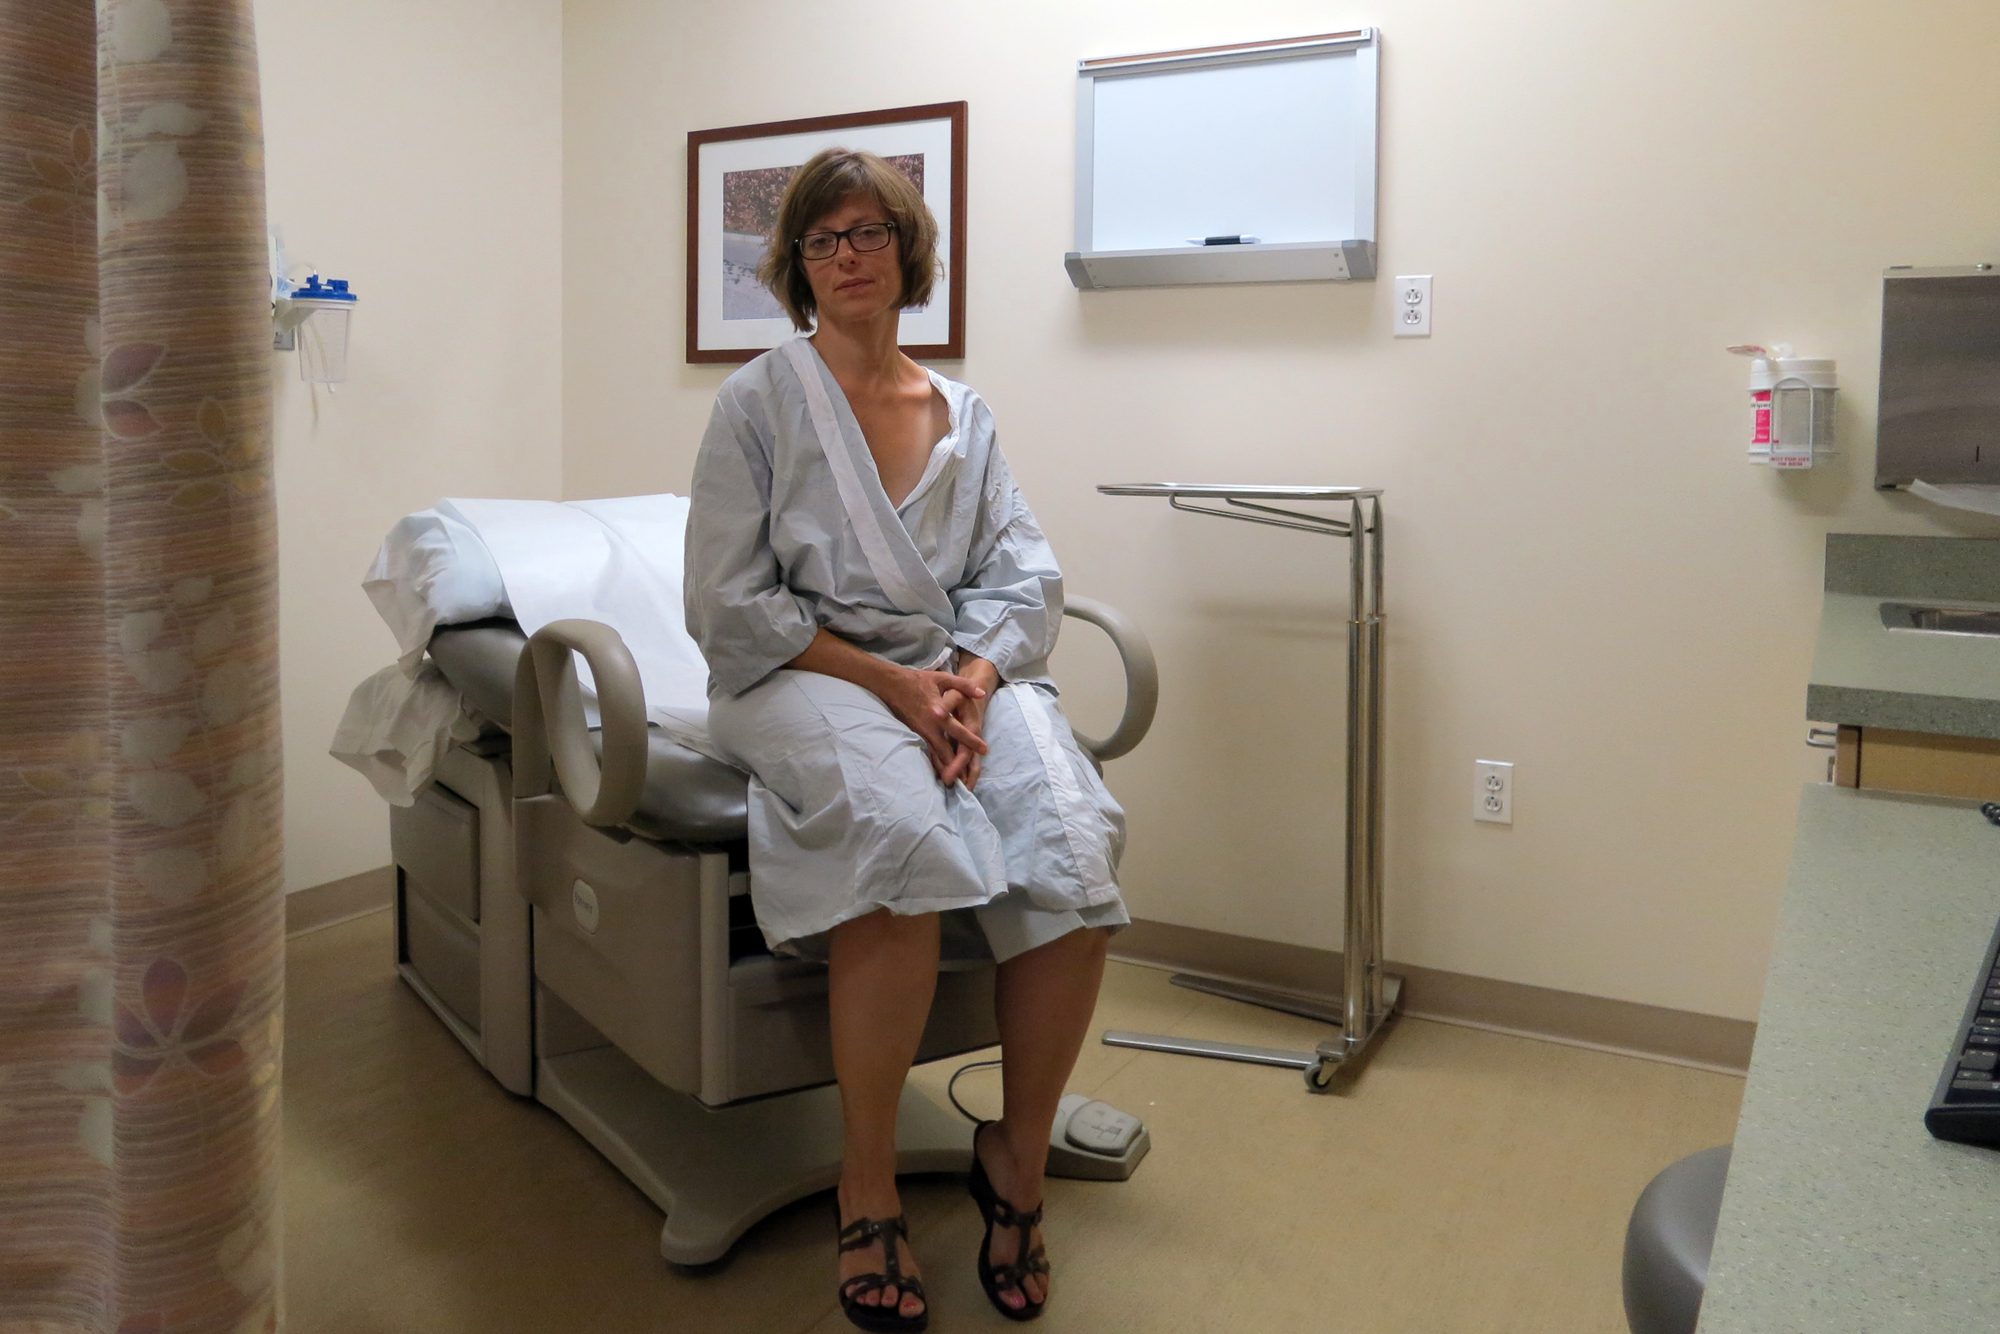 Breast cancer patient Amy Czerniec in an examining room at Froedtert Clinical Cancer Center, Milwaukee, Wisconsin